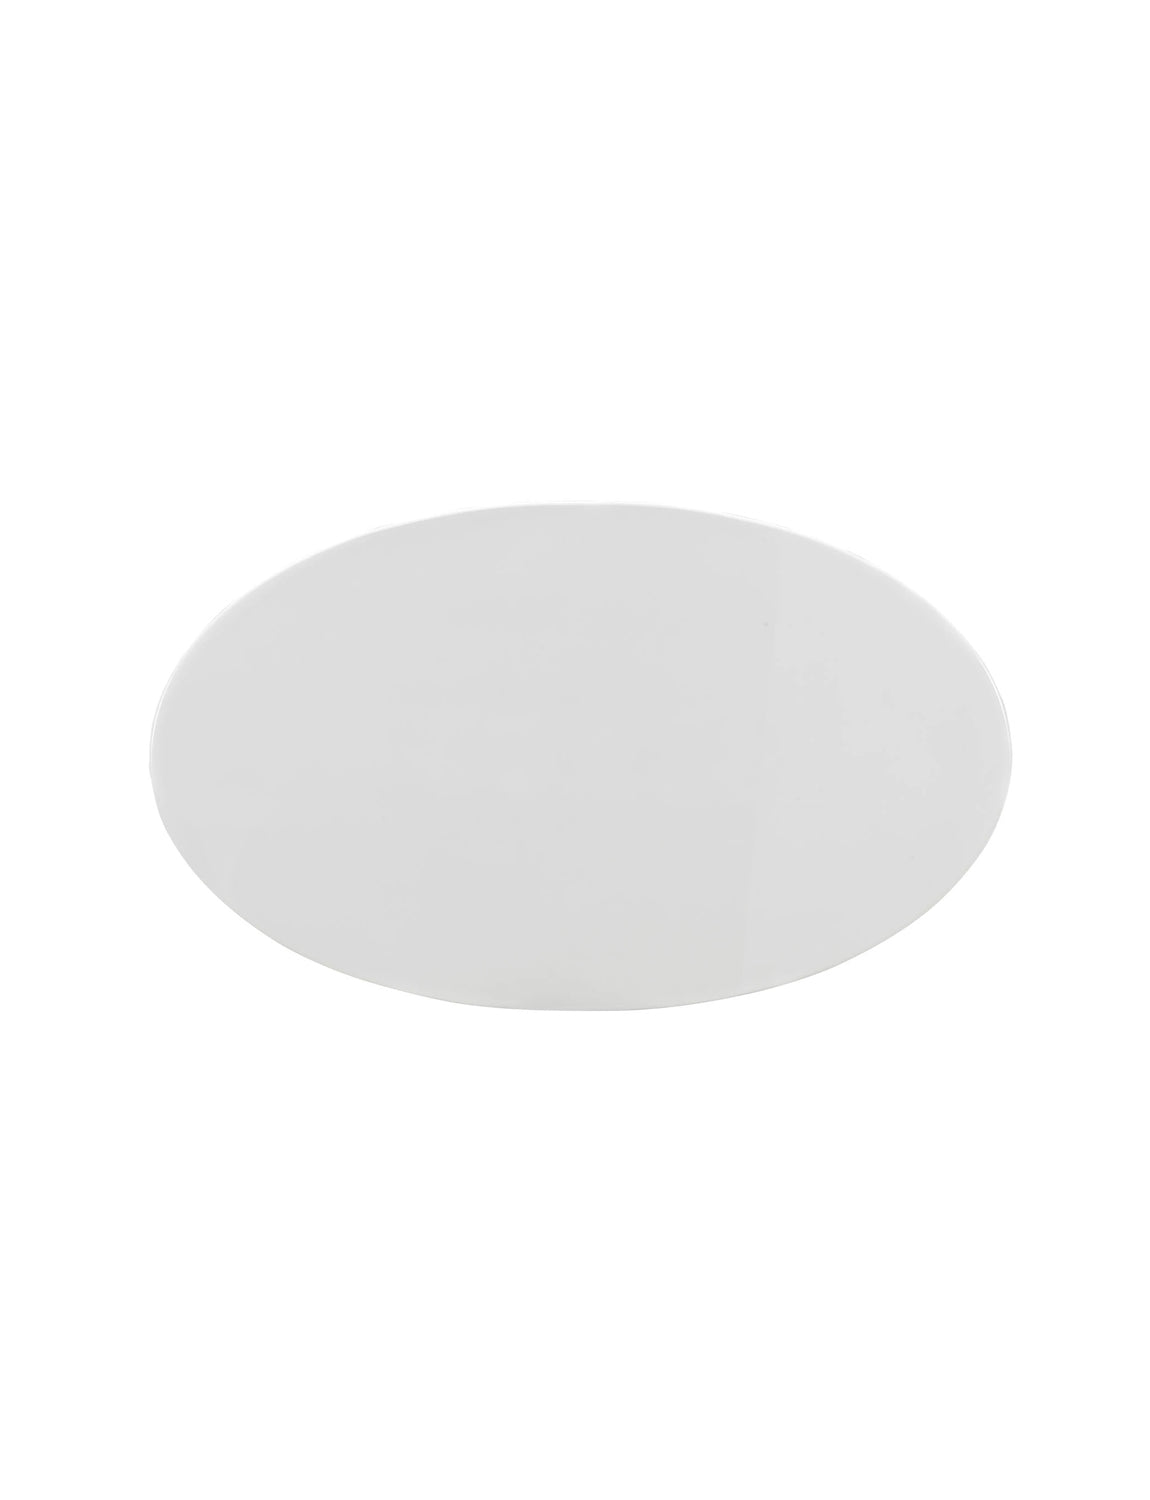 Lily White Oval Dining Table, white base